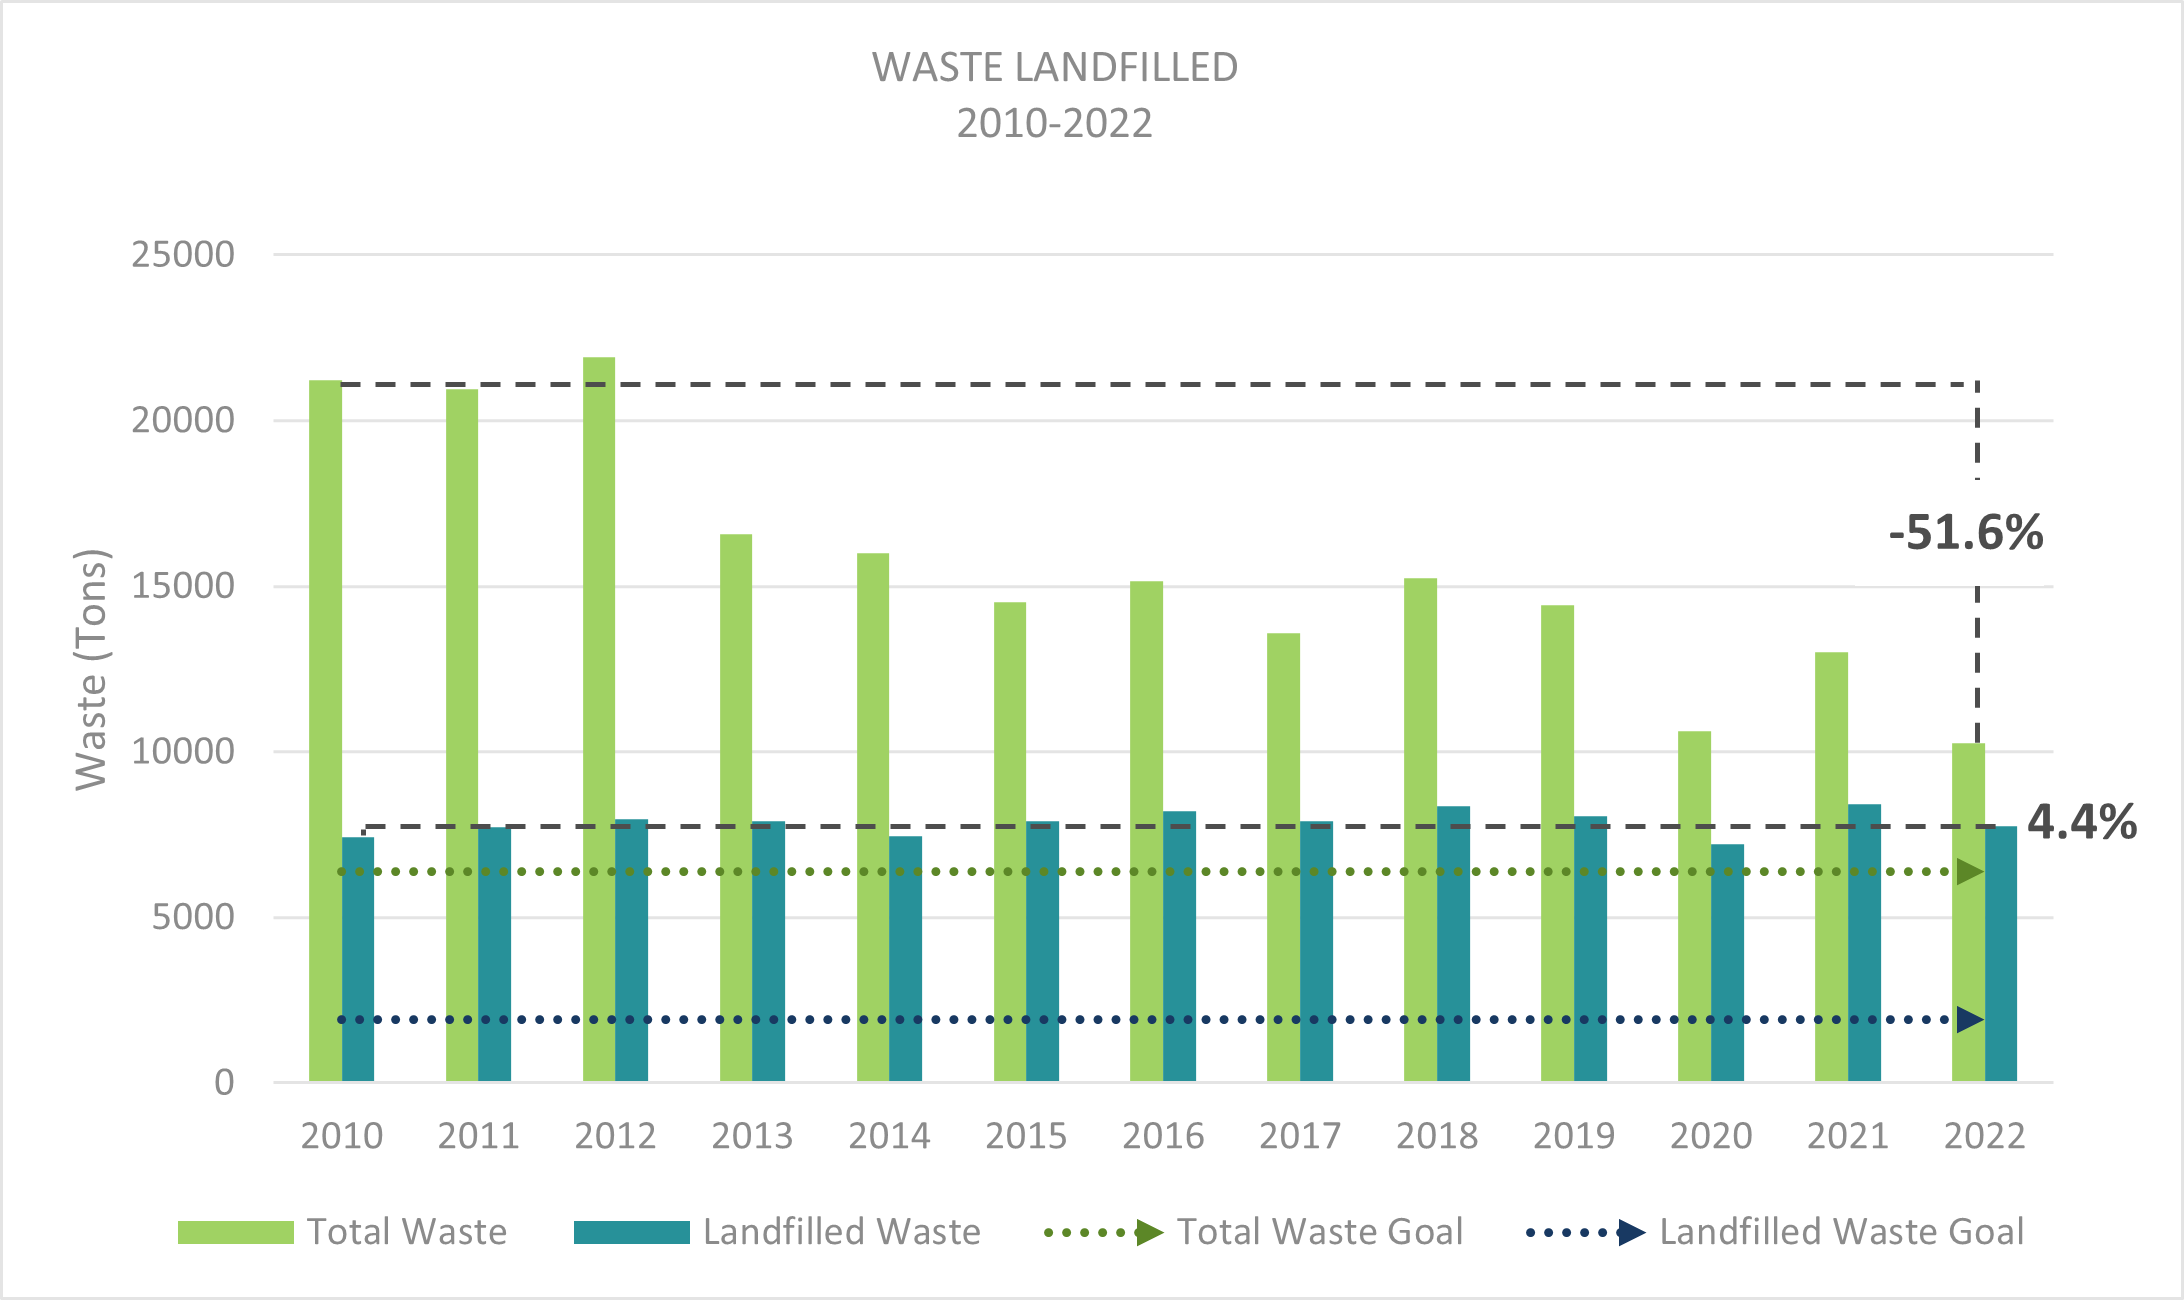 Chart showing waste reduction of 4.4% since 2010